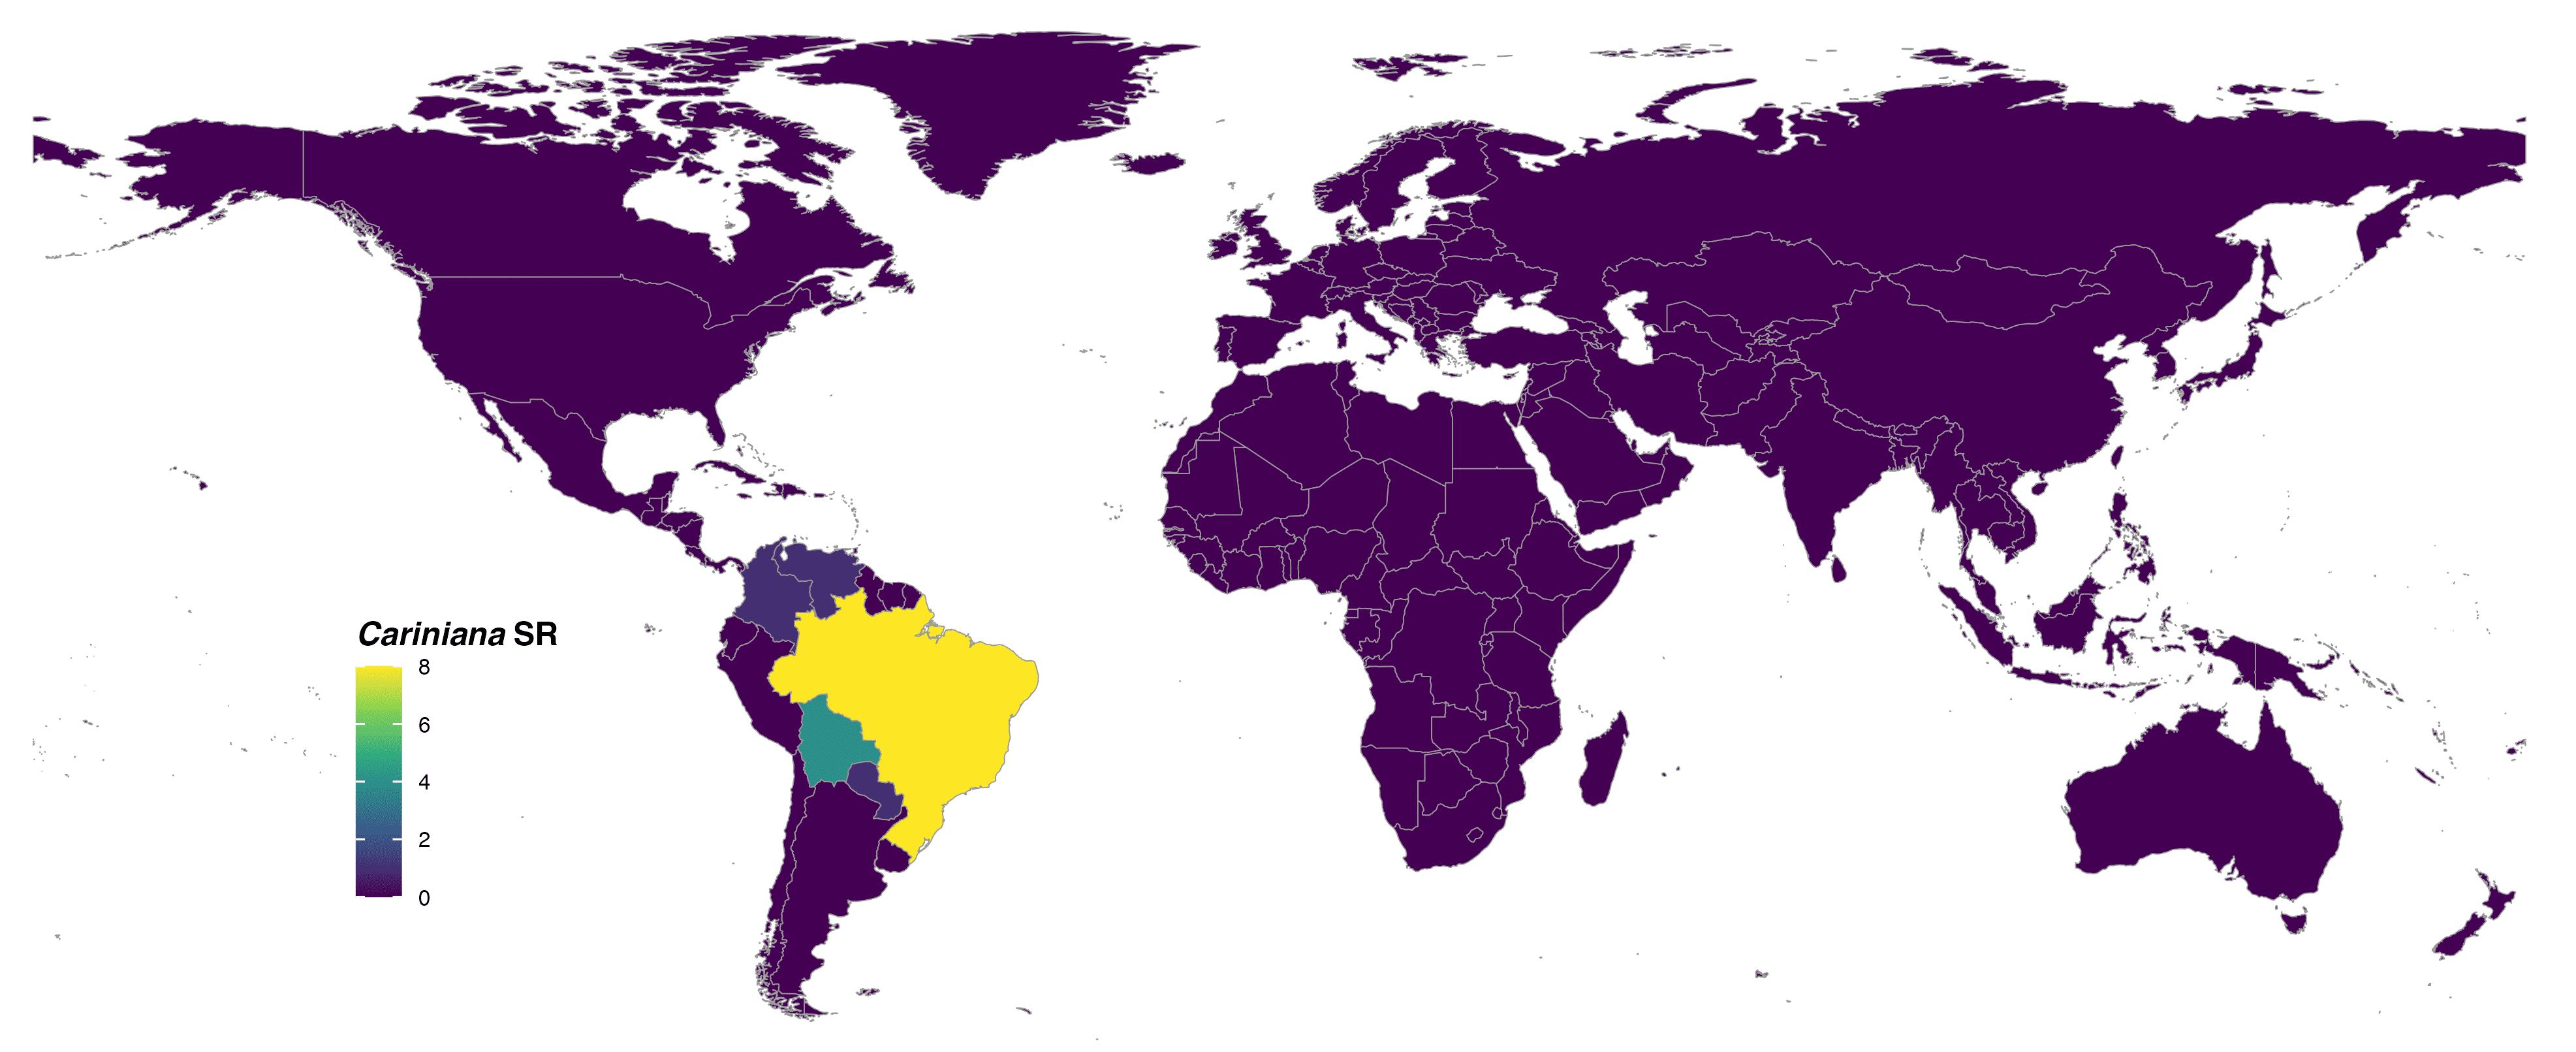 FIGURE 1. Global species richness of the genus _Cariniana_ at country level and colored with viridis scale.